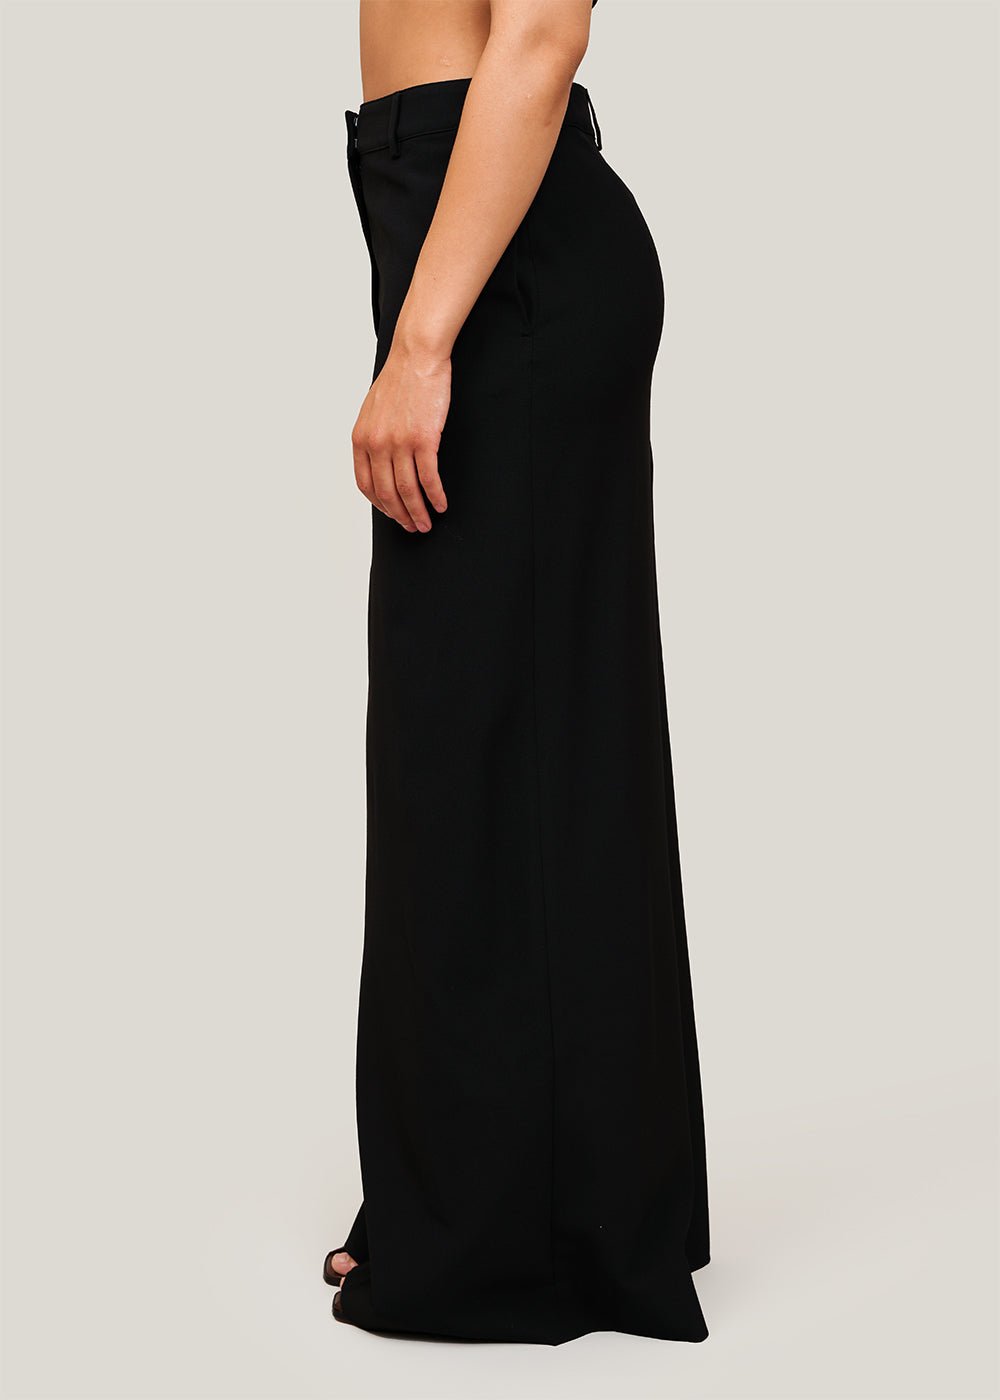 Beaufille Black Minter Maxi Skirt - New Classics Studios Sustainable Ethical Fashion Canada